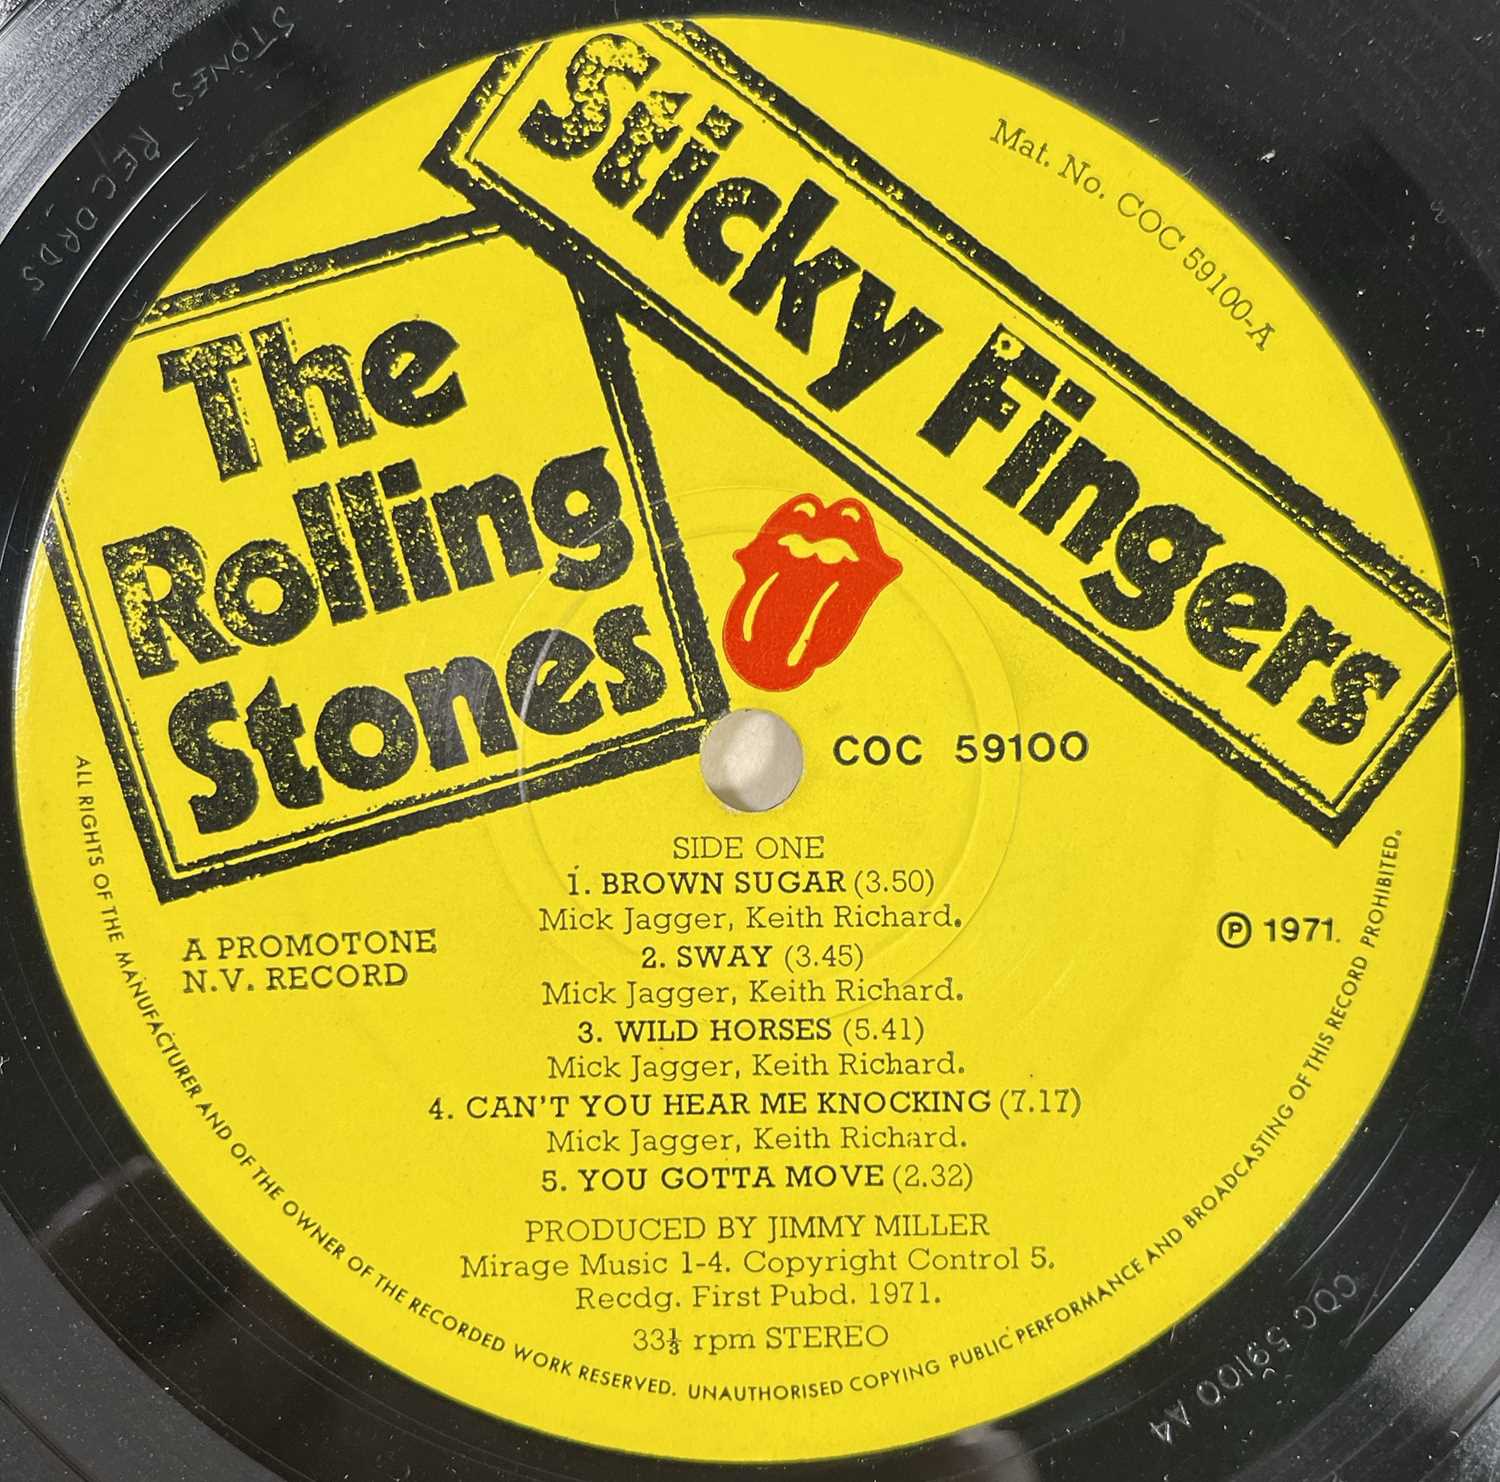 THE ROLLING STONES - STICKY FINGERS (LARGE ZIP) SIGNED BY MICK TAYLOR. - Image 5 of 6